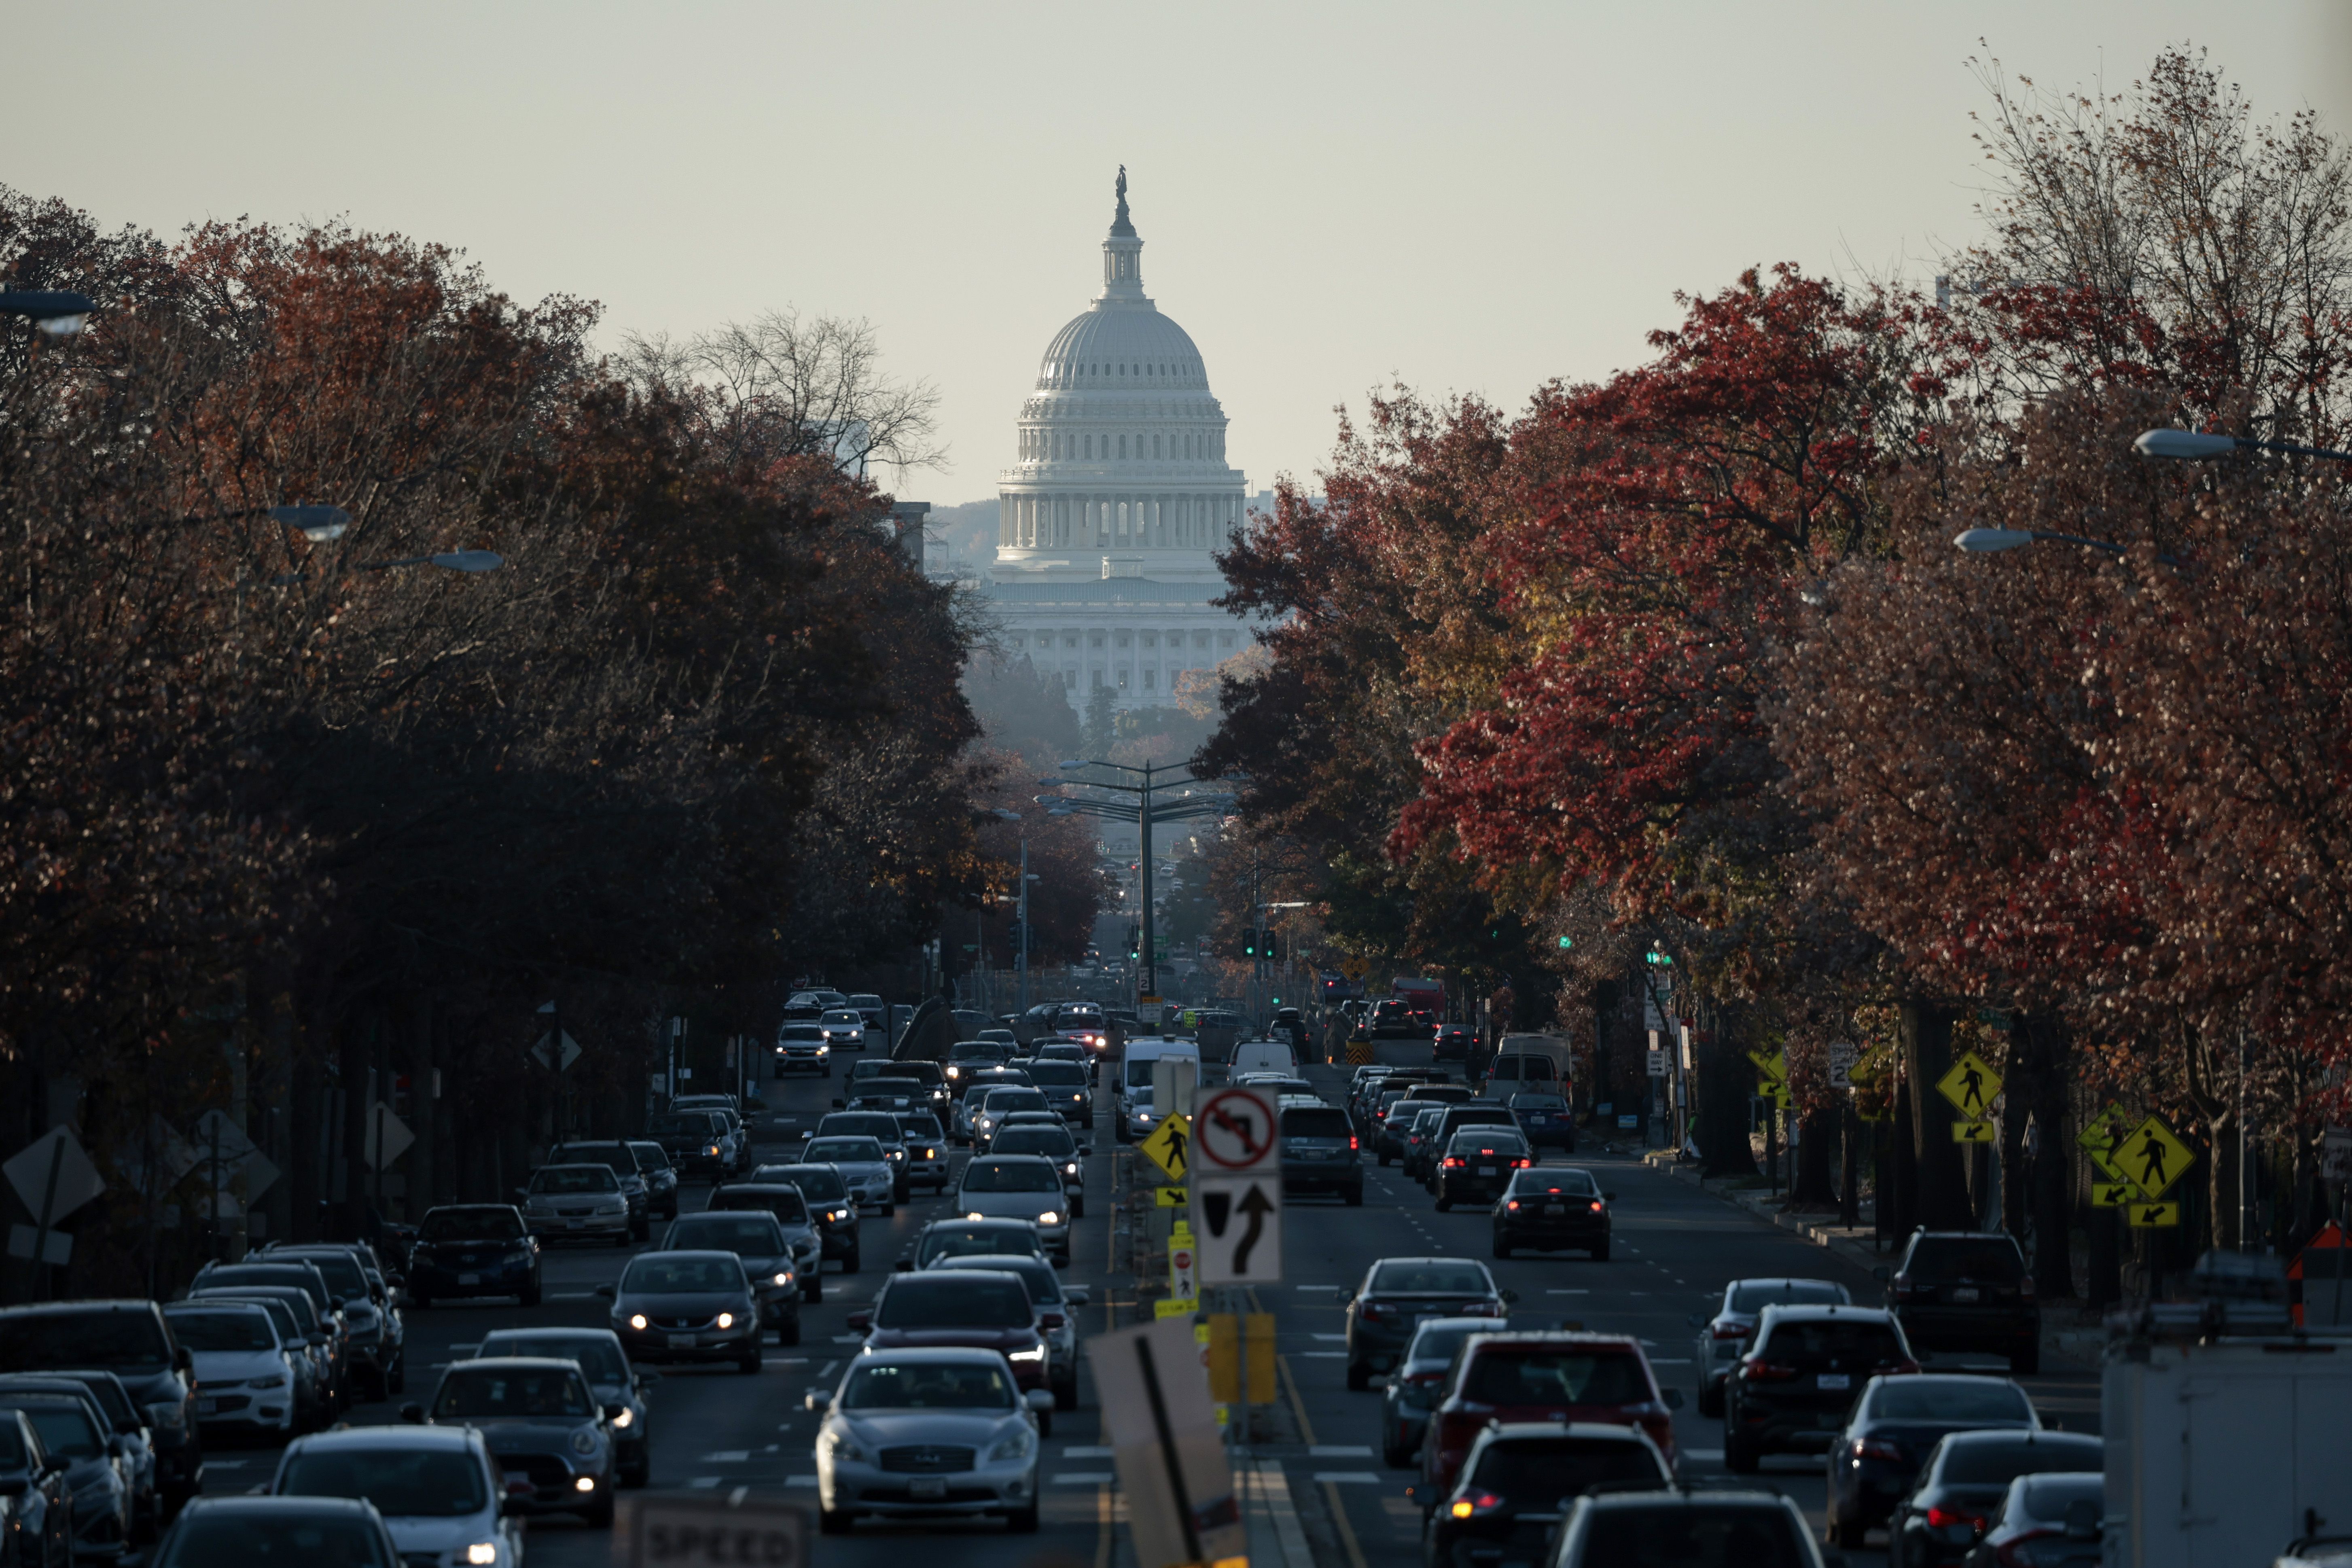 Photo of the U.S. Capitol building in the distance, with roads leading to and from crammed with cars